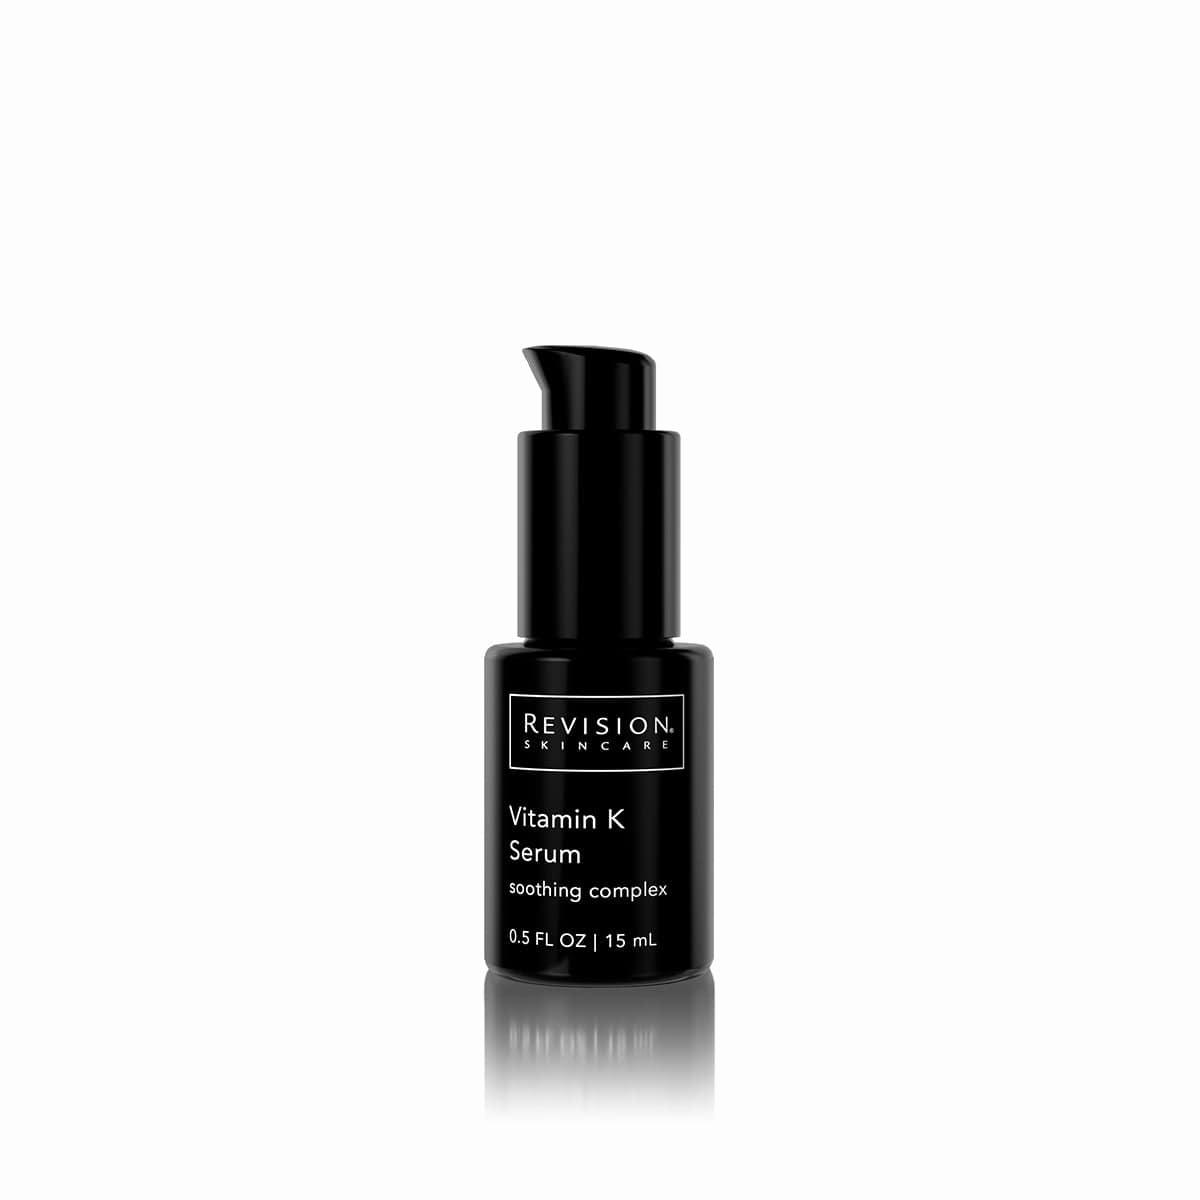 A black Revision Skincare bottle of Vitamin K Serum with a black lid.